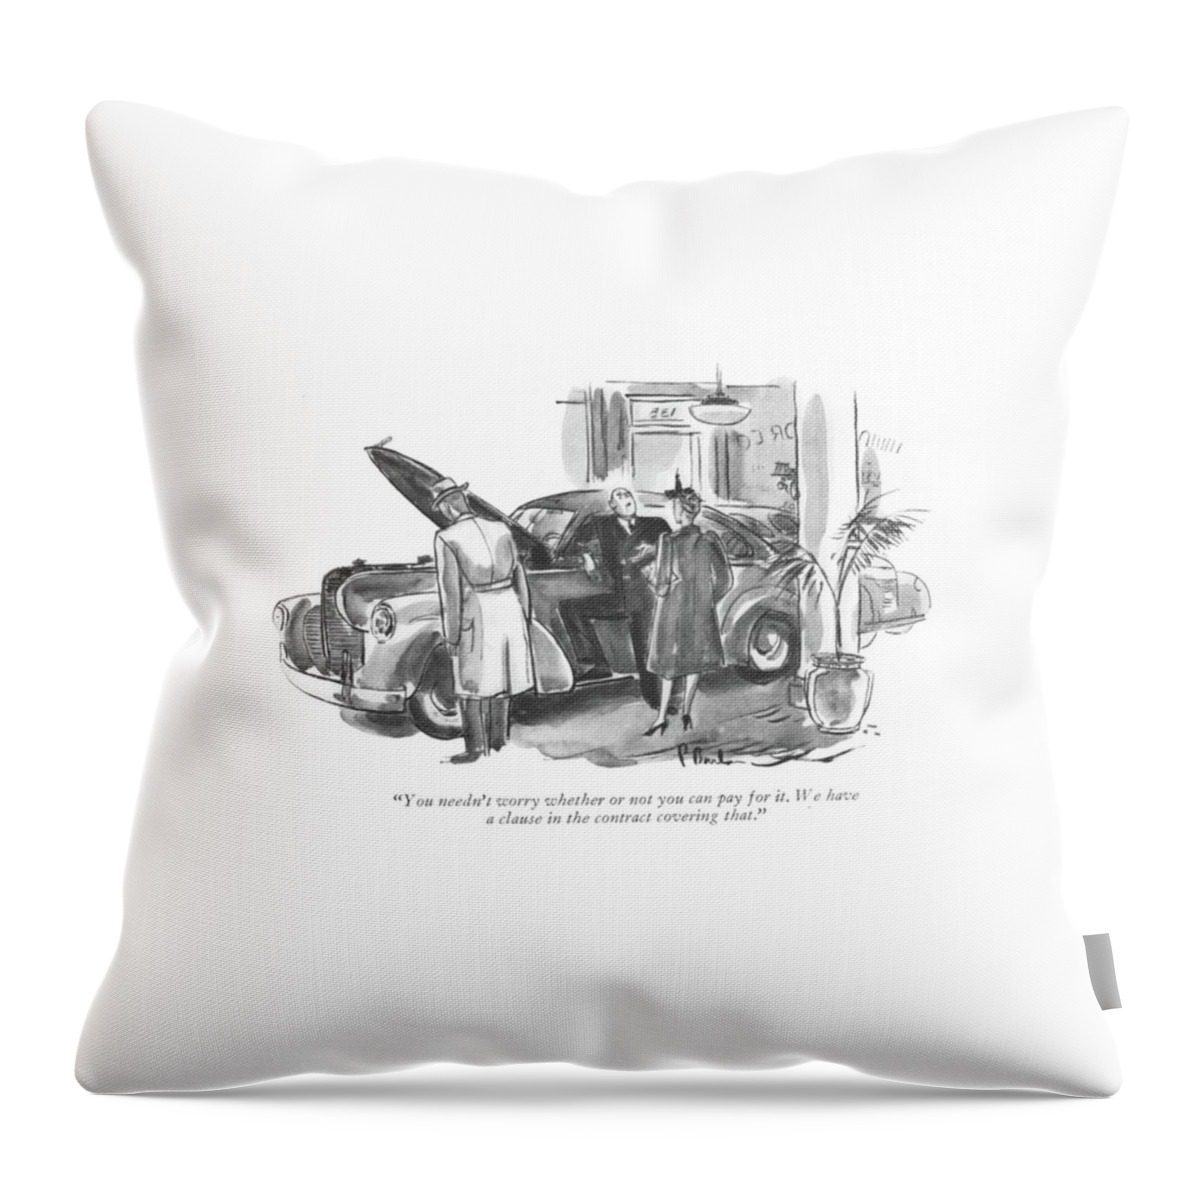 You Needn't Worry Whether Or Not You Can Pay Throw Pillow